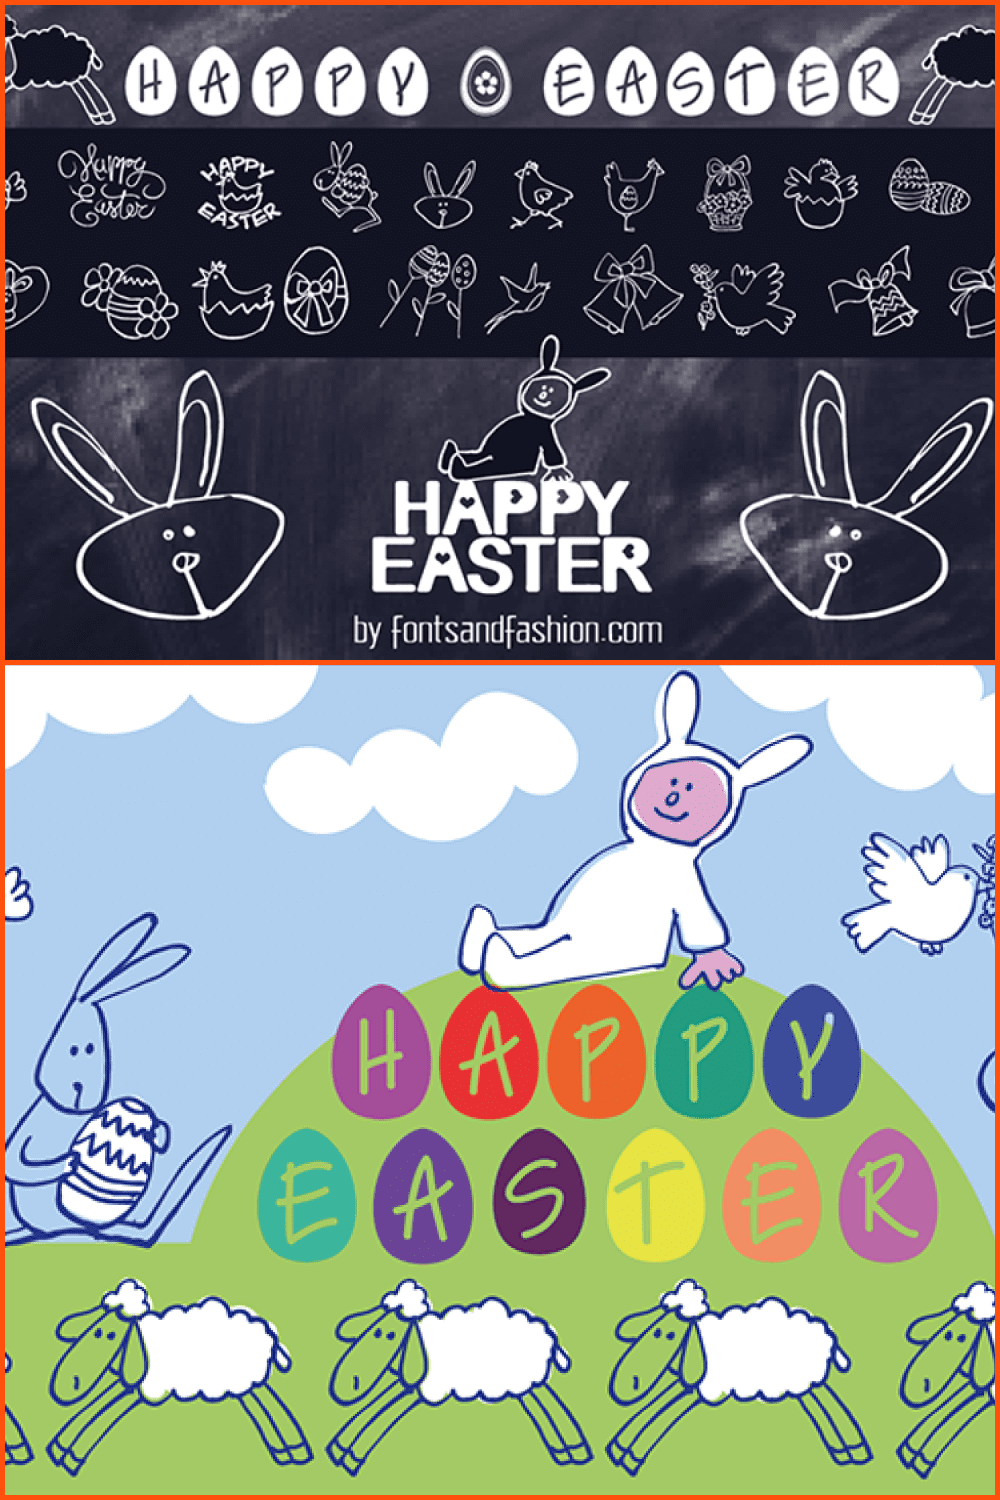 HAPPY EASTER font.